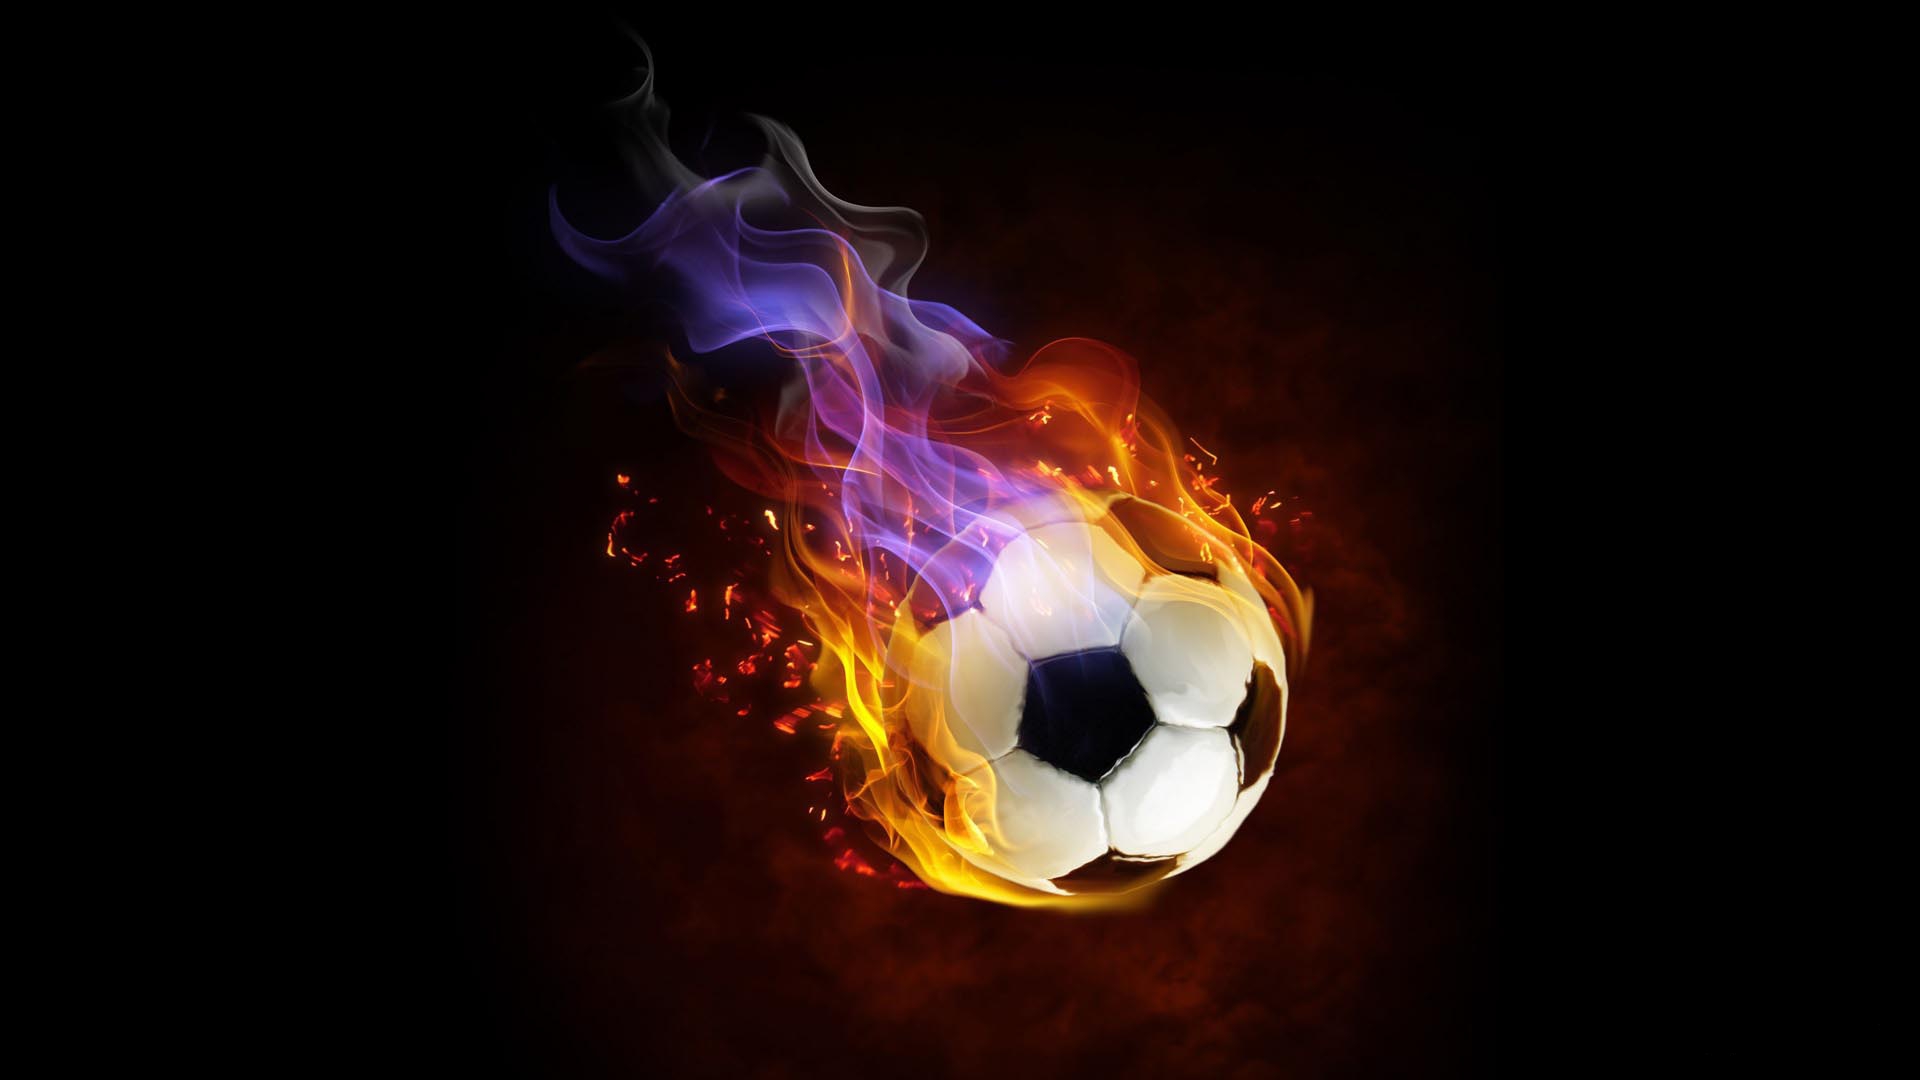  download HD Cool Soccer Wallpapers [1920x1080] for your 1920x1080